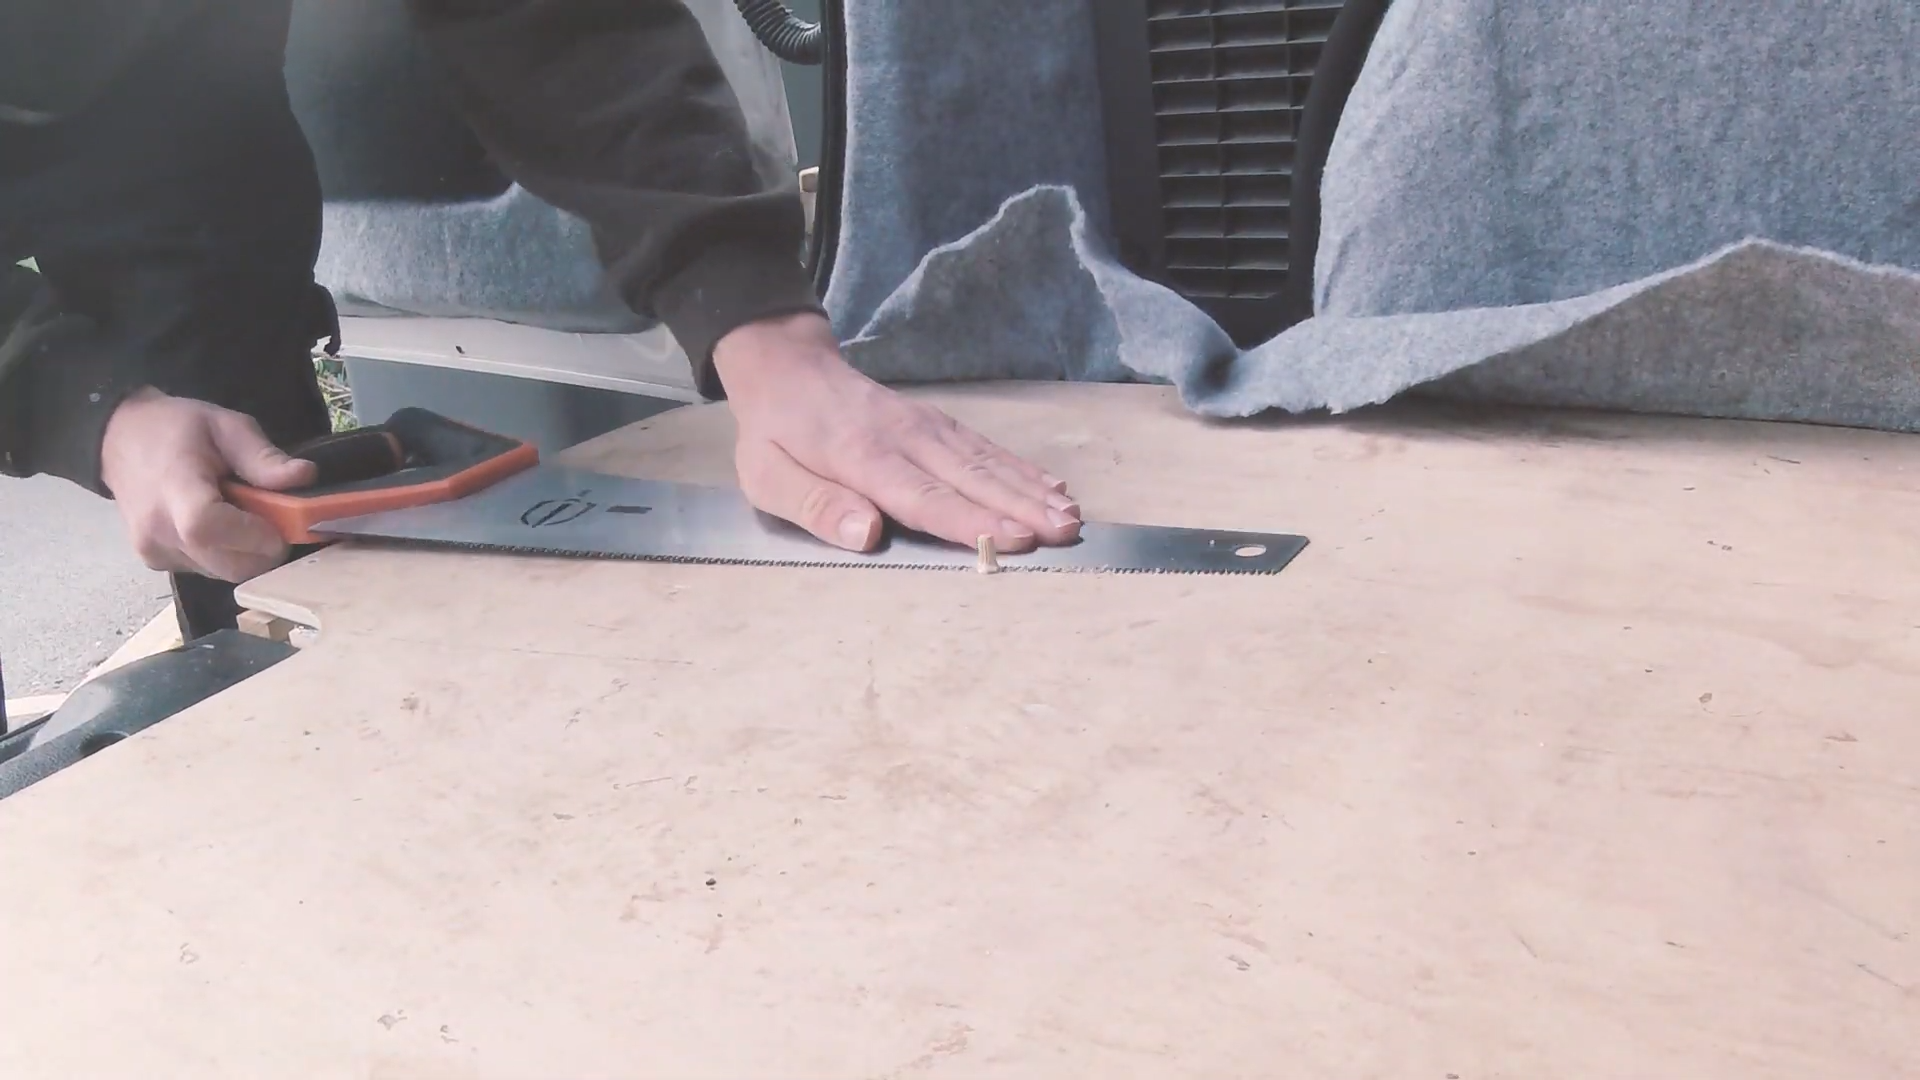 A saw cutting the tops off the wooden dowels